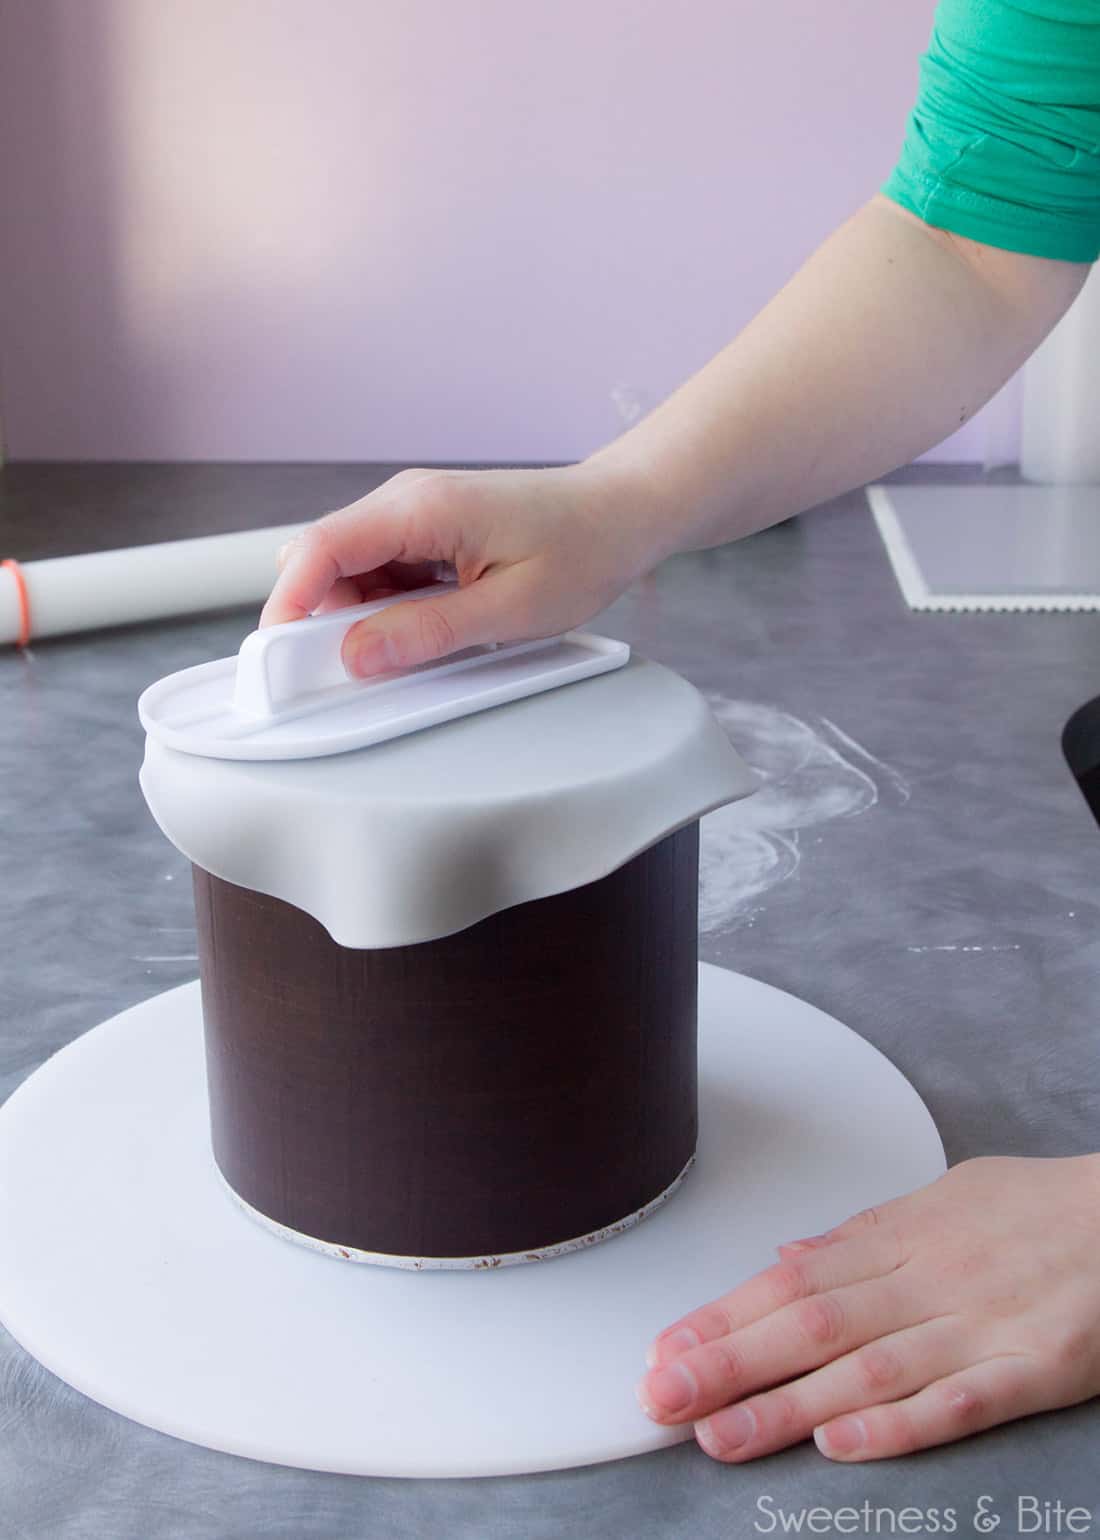 Using a fondant smoother to smooth out air bubbles under the fondant.